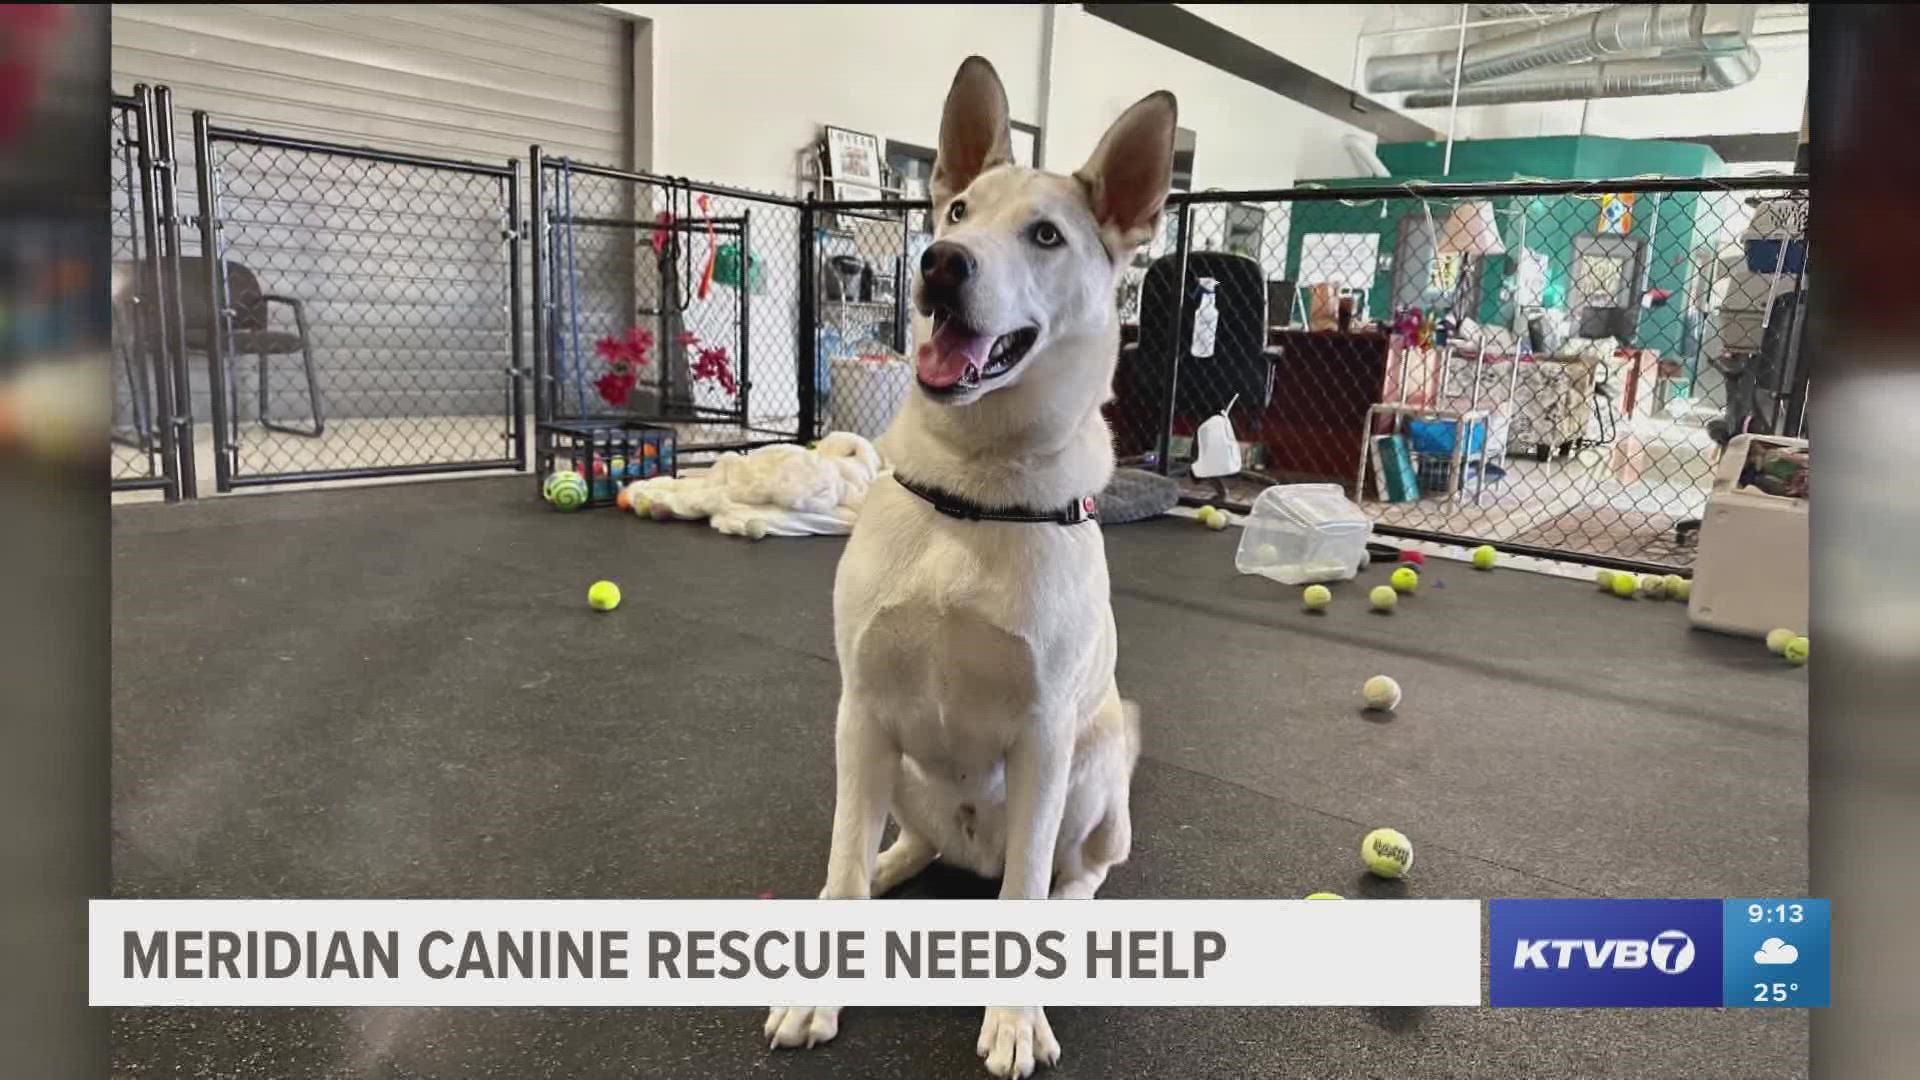 Meridian Canine Rescue has received 30 to 40 dog surrender inquires in recent months. They are unable to take in dogs until community members come forward to foster.